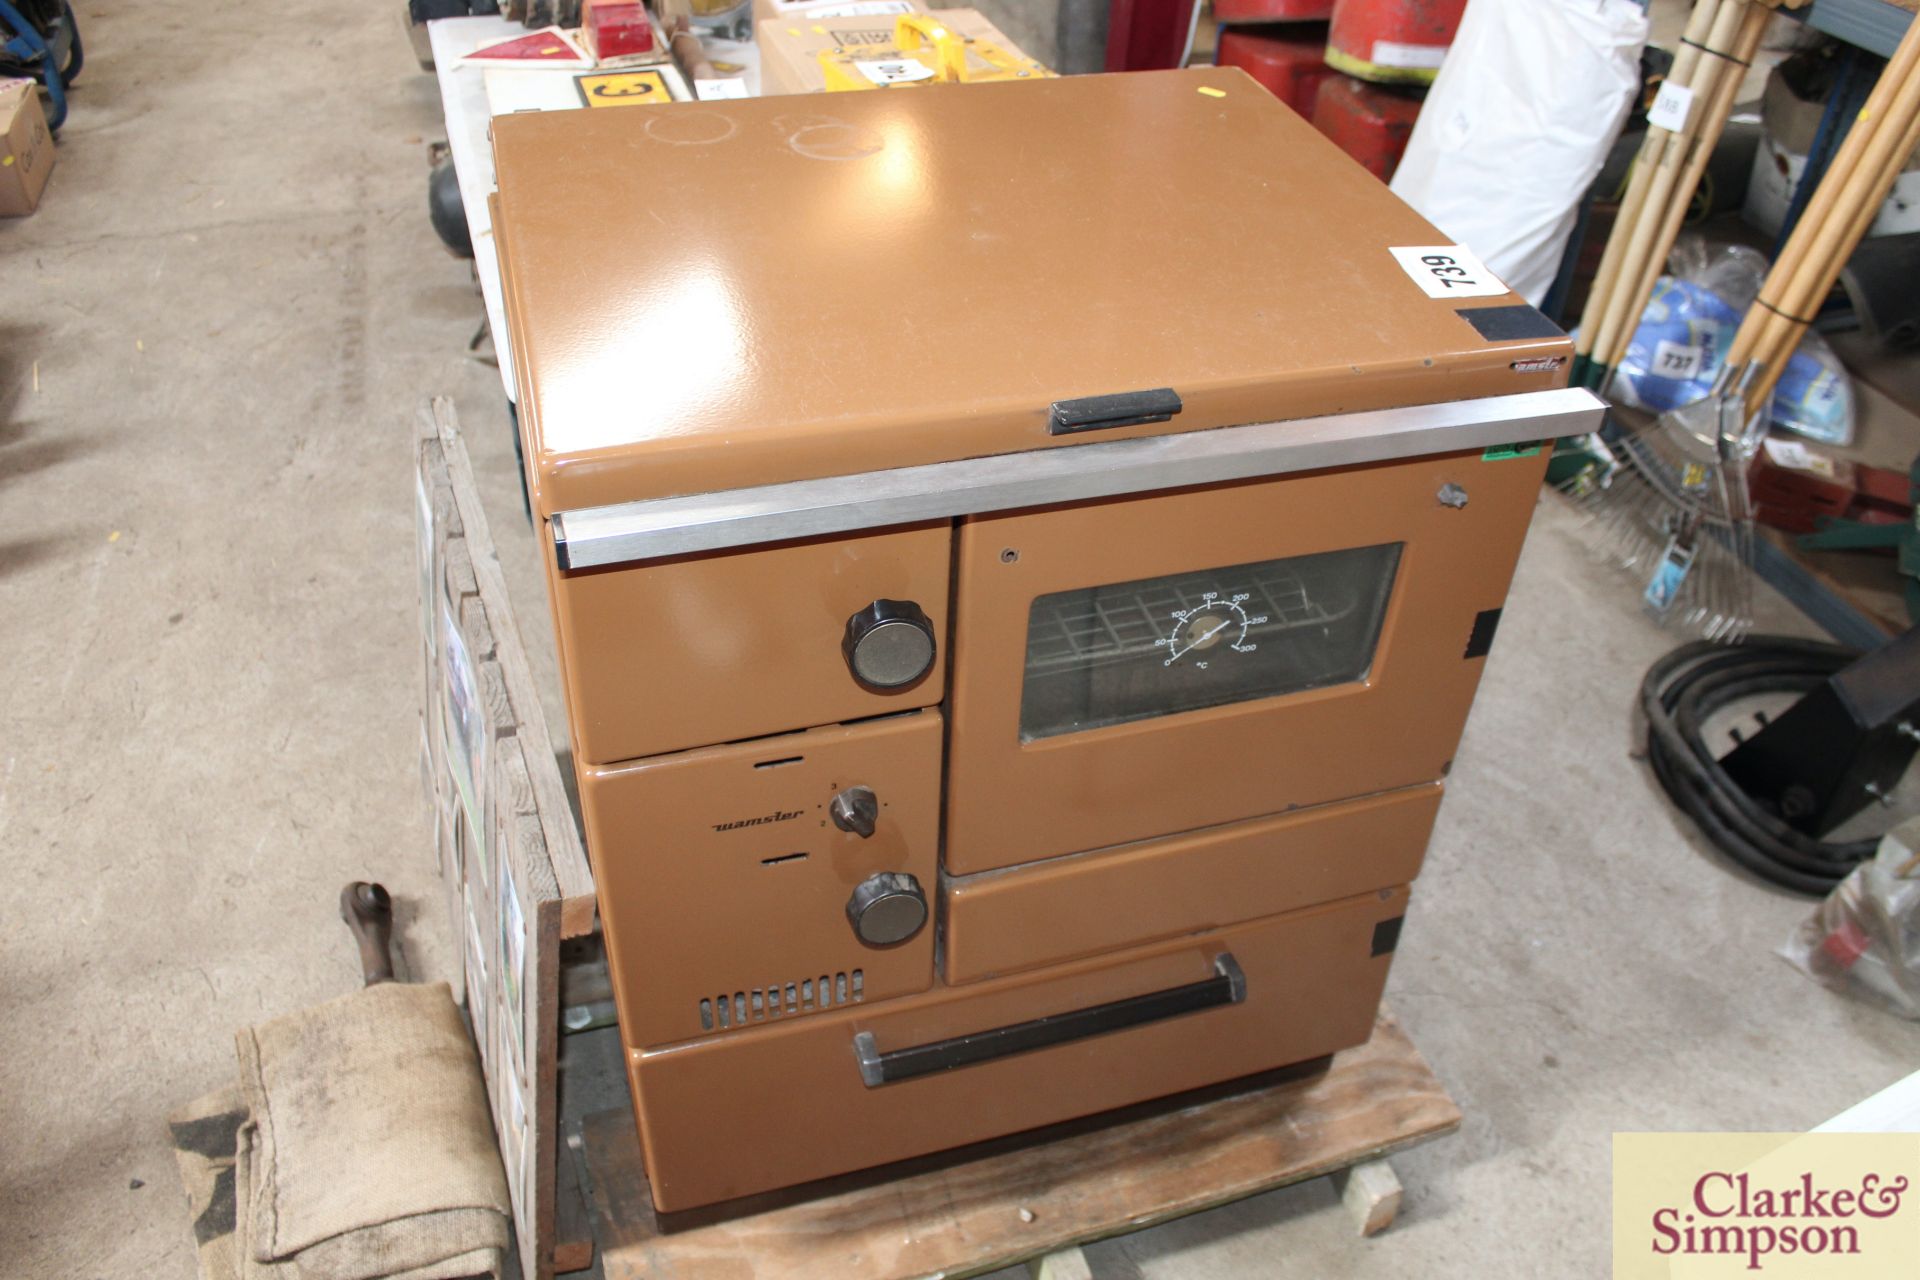 Wamsler 10KW multifuel cooker with central heating and hot water boiler. 700mm x 600mm.